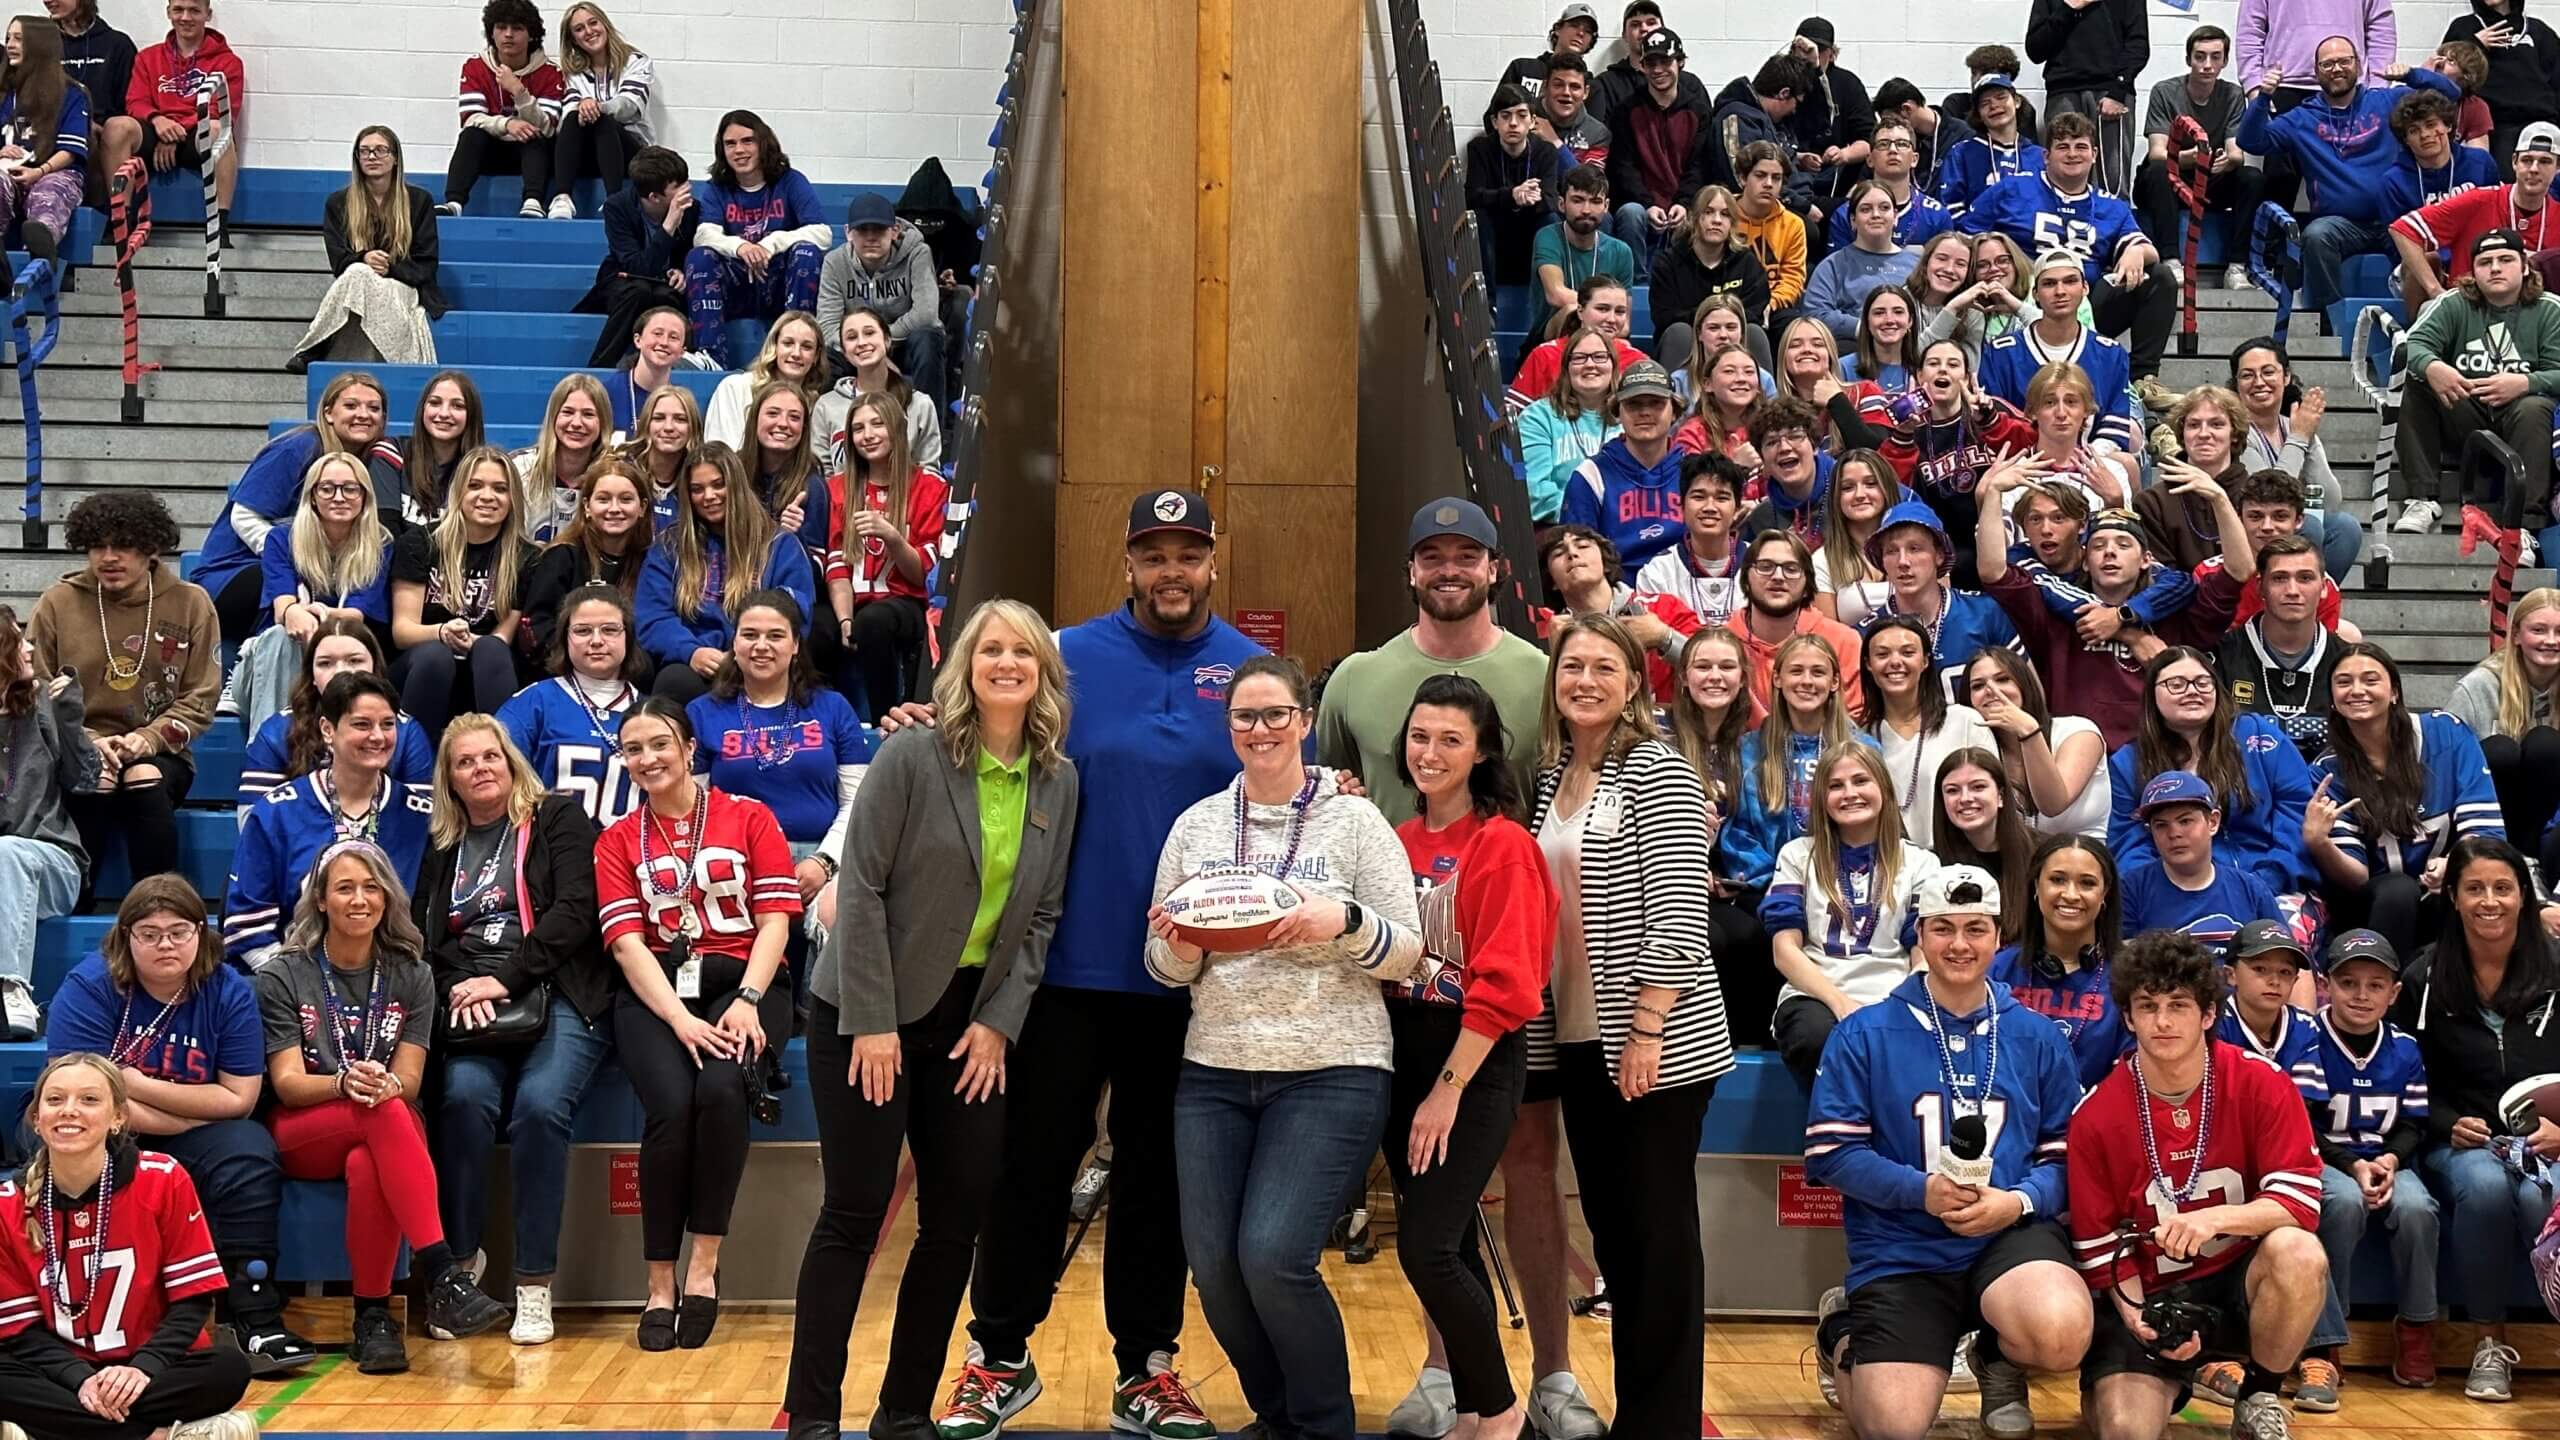 Buffalo Bills players Dion Dawkins and Dawson Knox, representatives from Wegmans and the Bills Foundation, and high school staff members hold football in front of gymnasium stands filled with high school students.